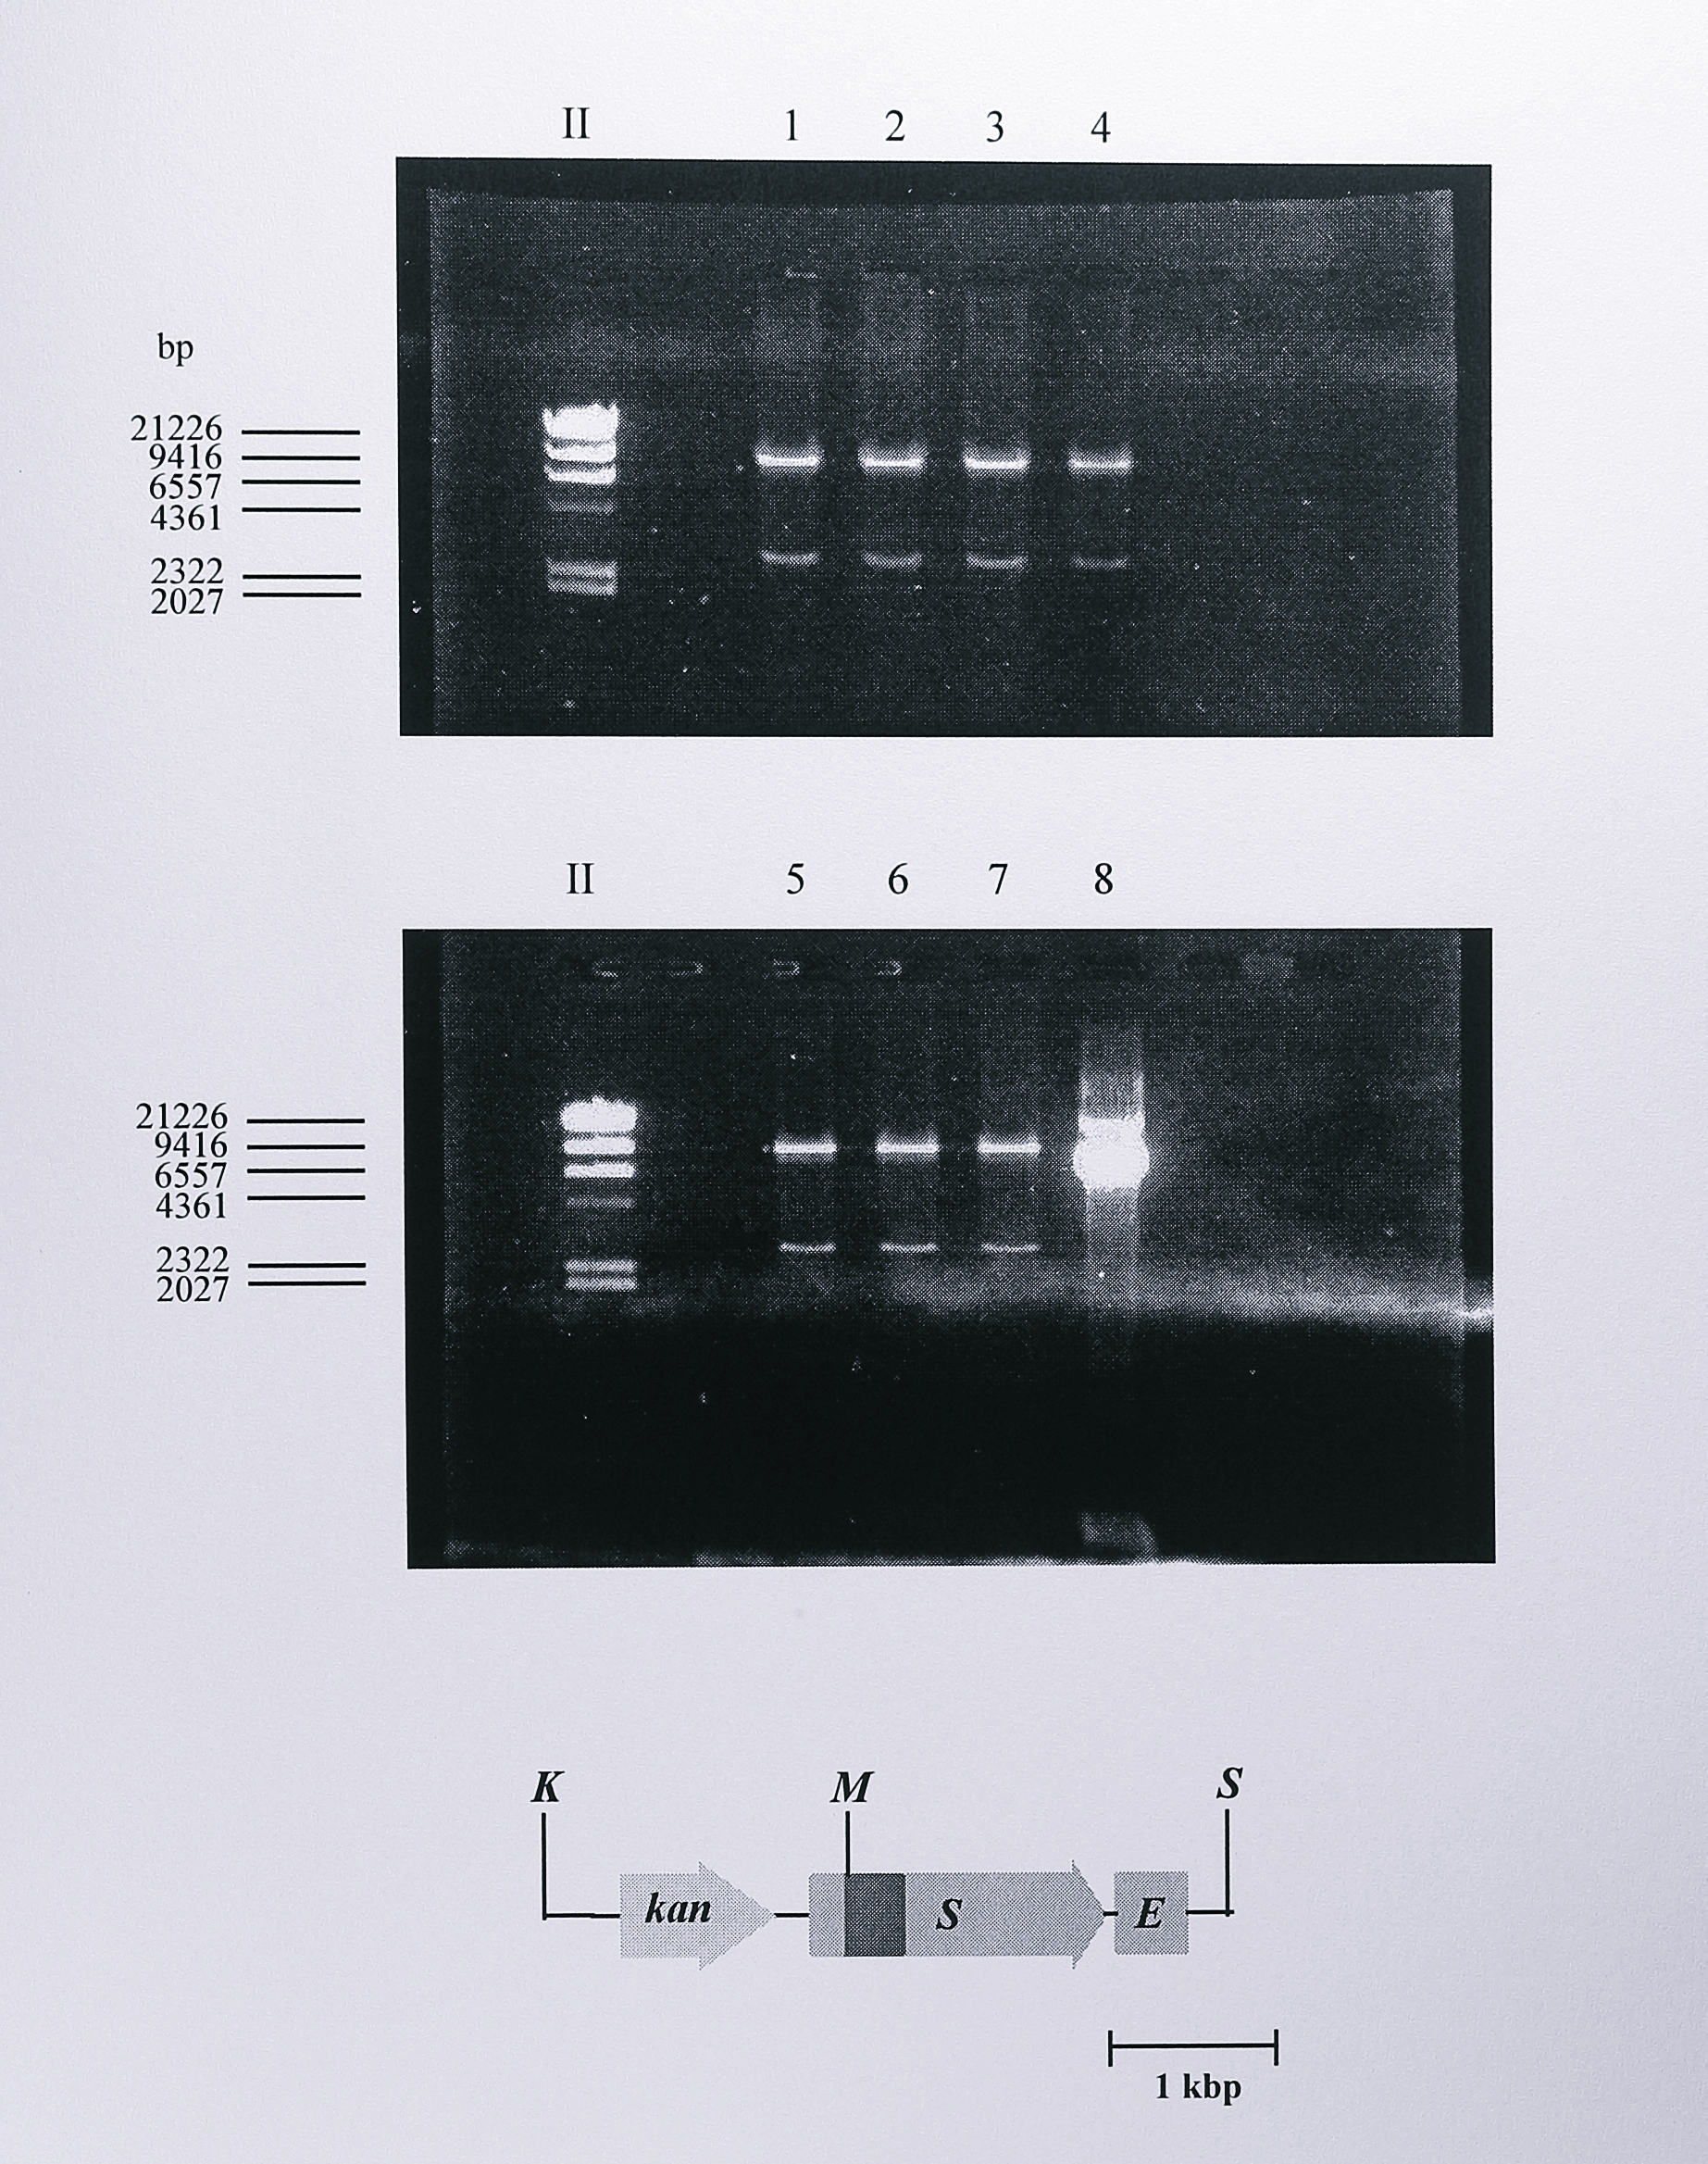 Restriction digest analysis of plasmid pMMBY25F using _MluI_. Following ligation and transformation, plasmid DNA was isolated from the transformed cells and digested using _MluI_ to check for the presence of the Y25F mutation in the _nirS_ gene. Plasmid pMMB67EH into which the _KpnI_ - _SacI_ insert from pBY25FK was cloned contains a single _MluI_ site, so this digest generated two fragments of approximate sizes 10.3 and 2.8 kbp, seen in lanes 1-7. Enzymes: K, _KpnI_, M, _MluI_, S, _SacI_. The lane labelled II contains DNA size standards, some of which are indicated at the left of the gel.